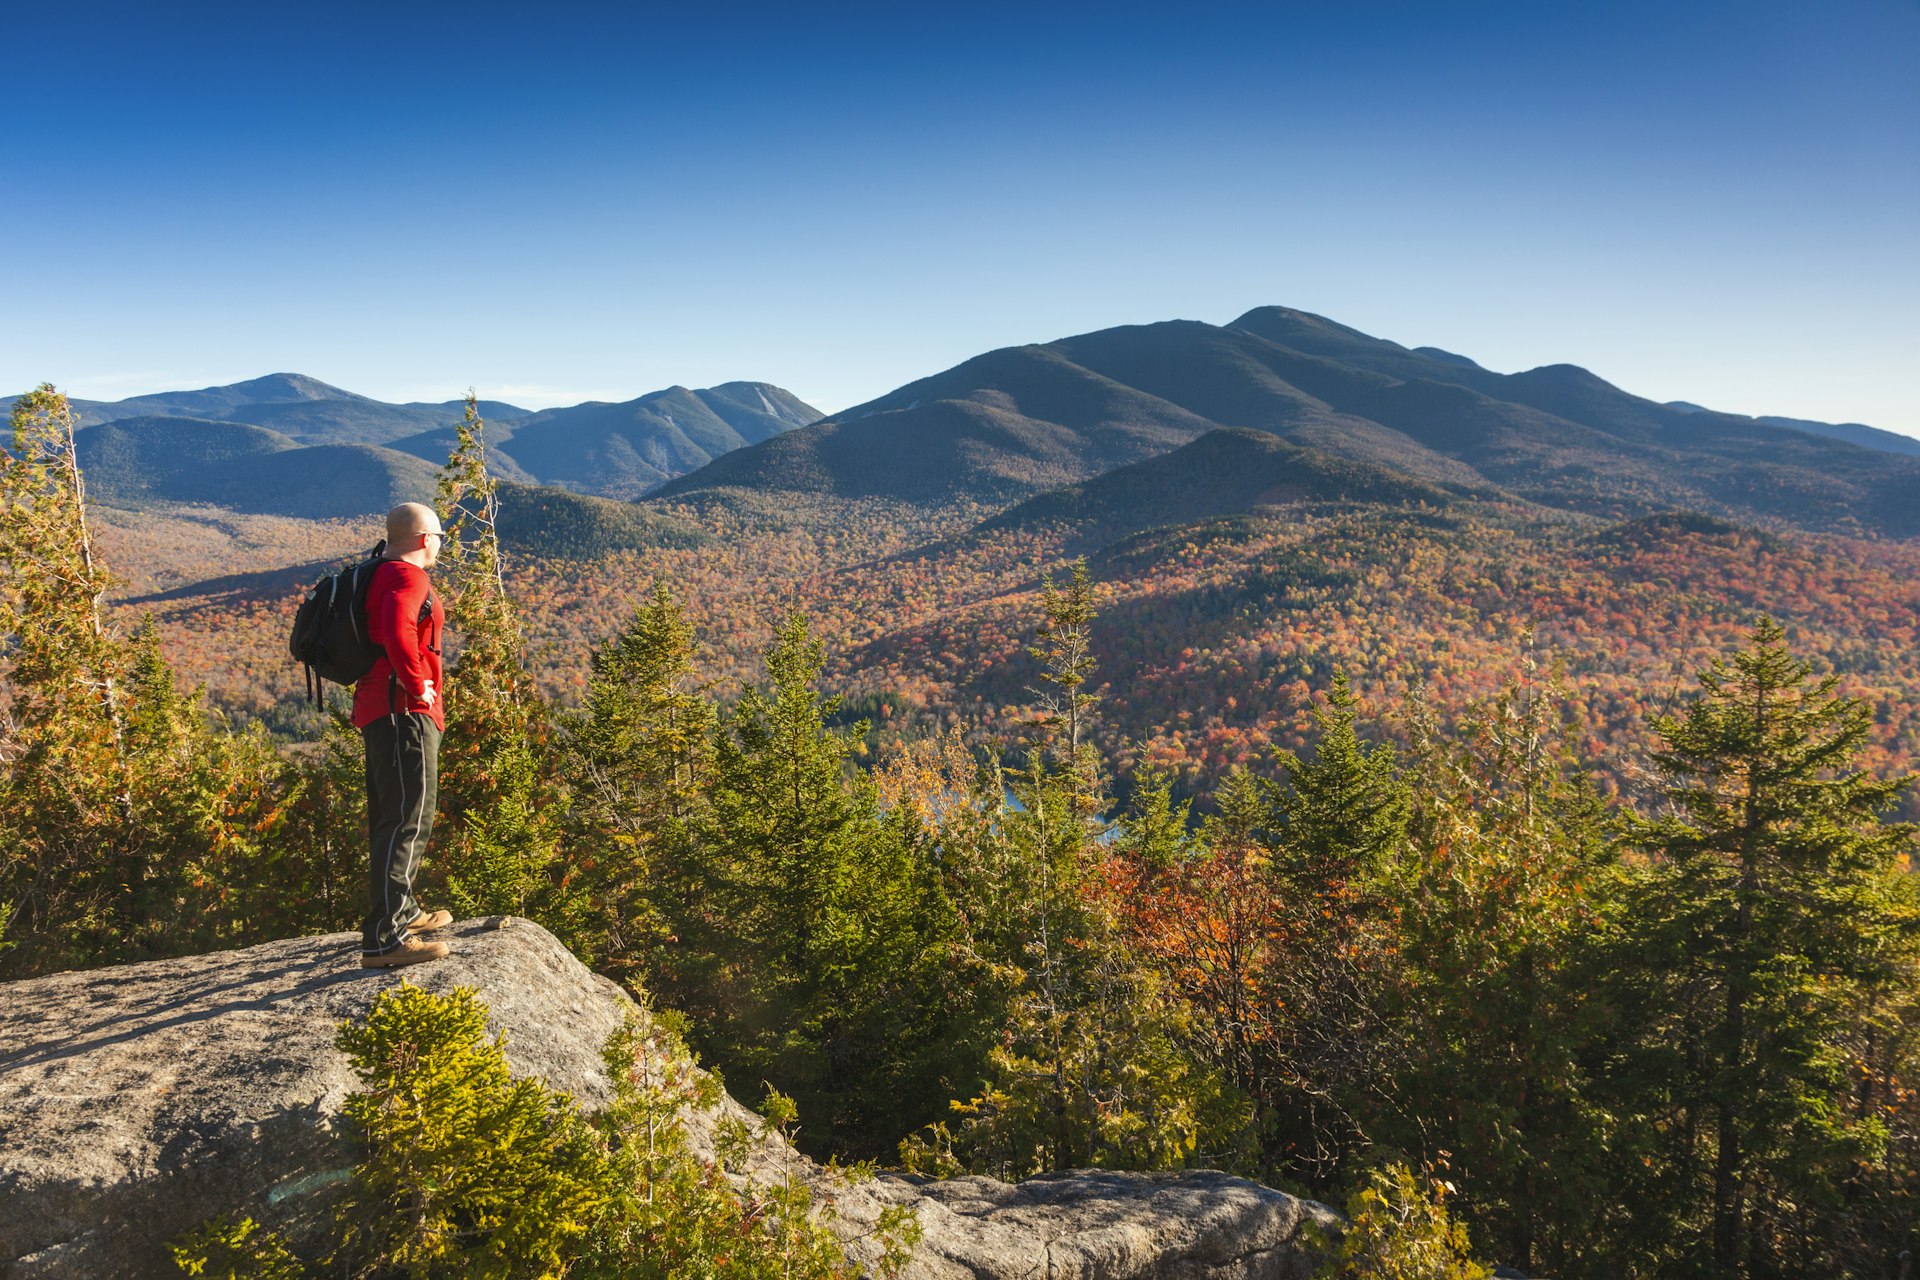 A hiker in fall in the Adirondack Mountains, New York State, USA